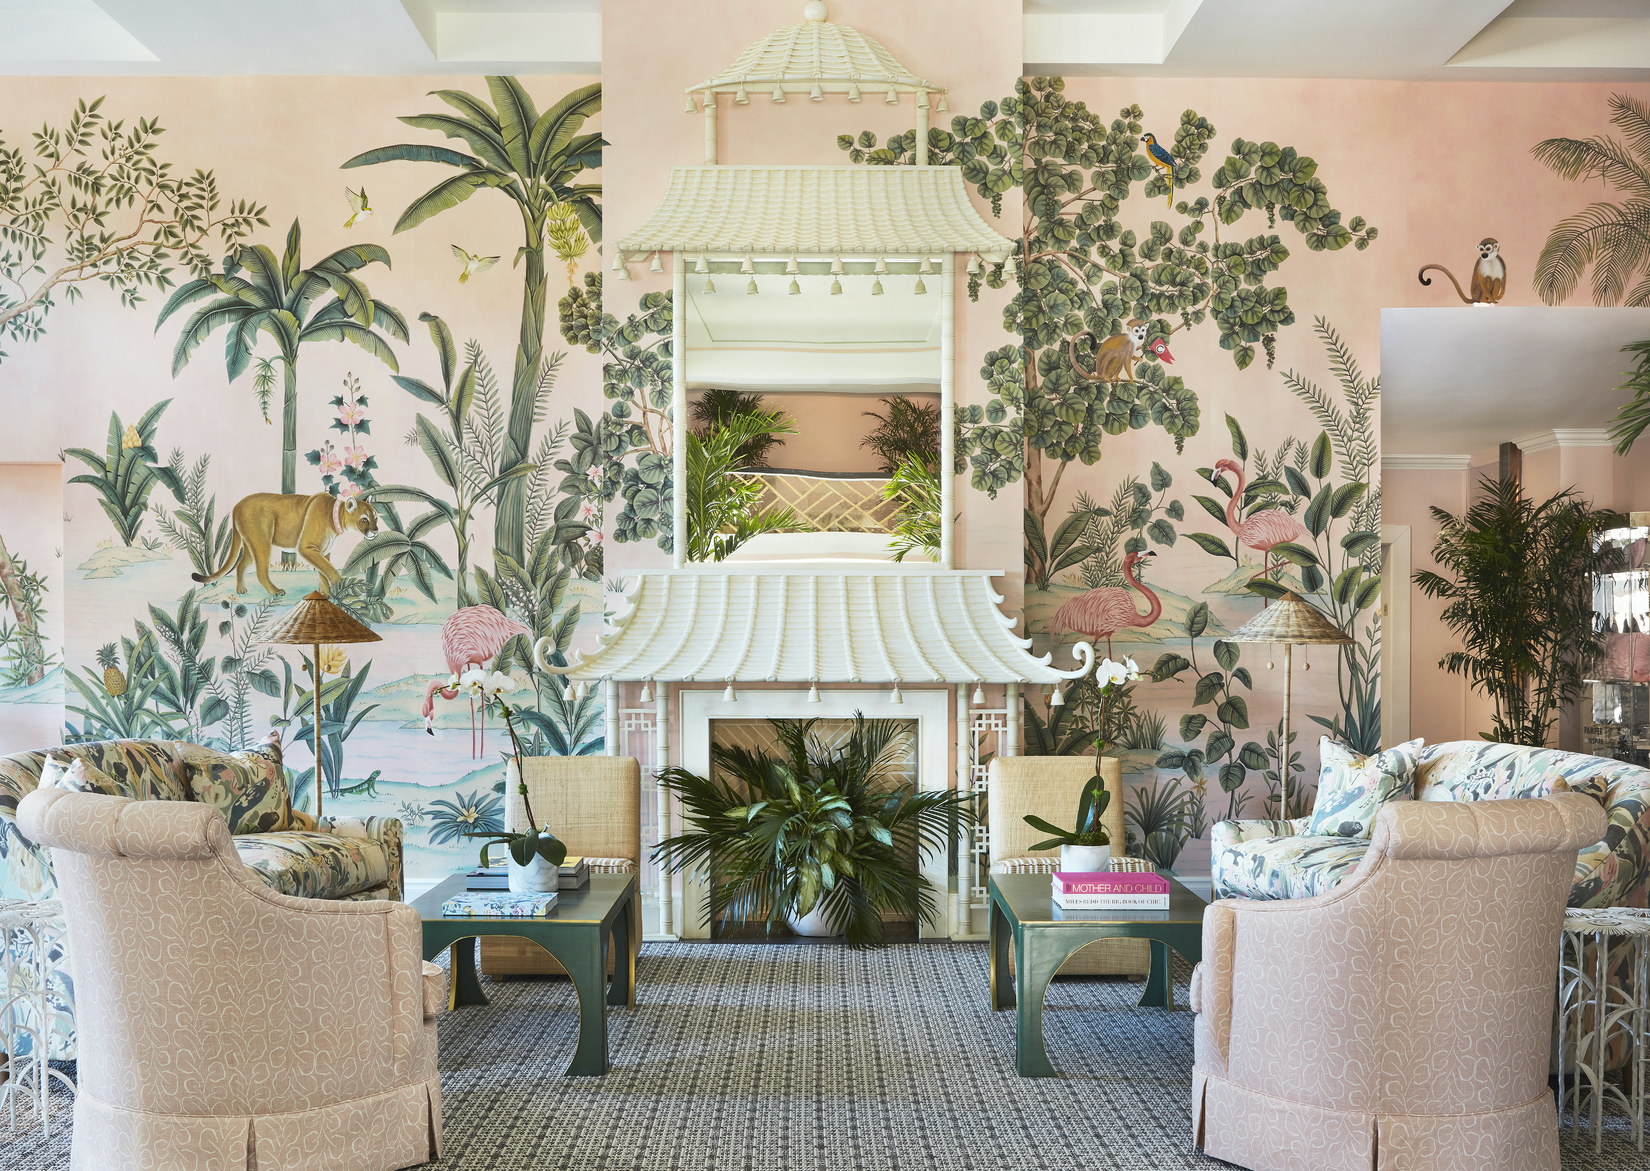 “The Colony” on Pink edo paper, designed exclusively for the lobby of the Colony Hotel in Palm Beach, Fla. 